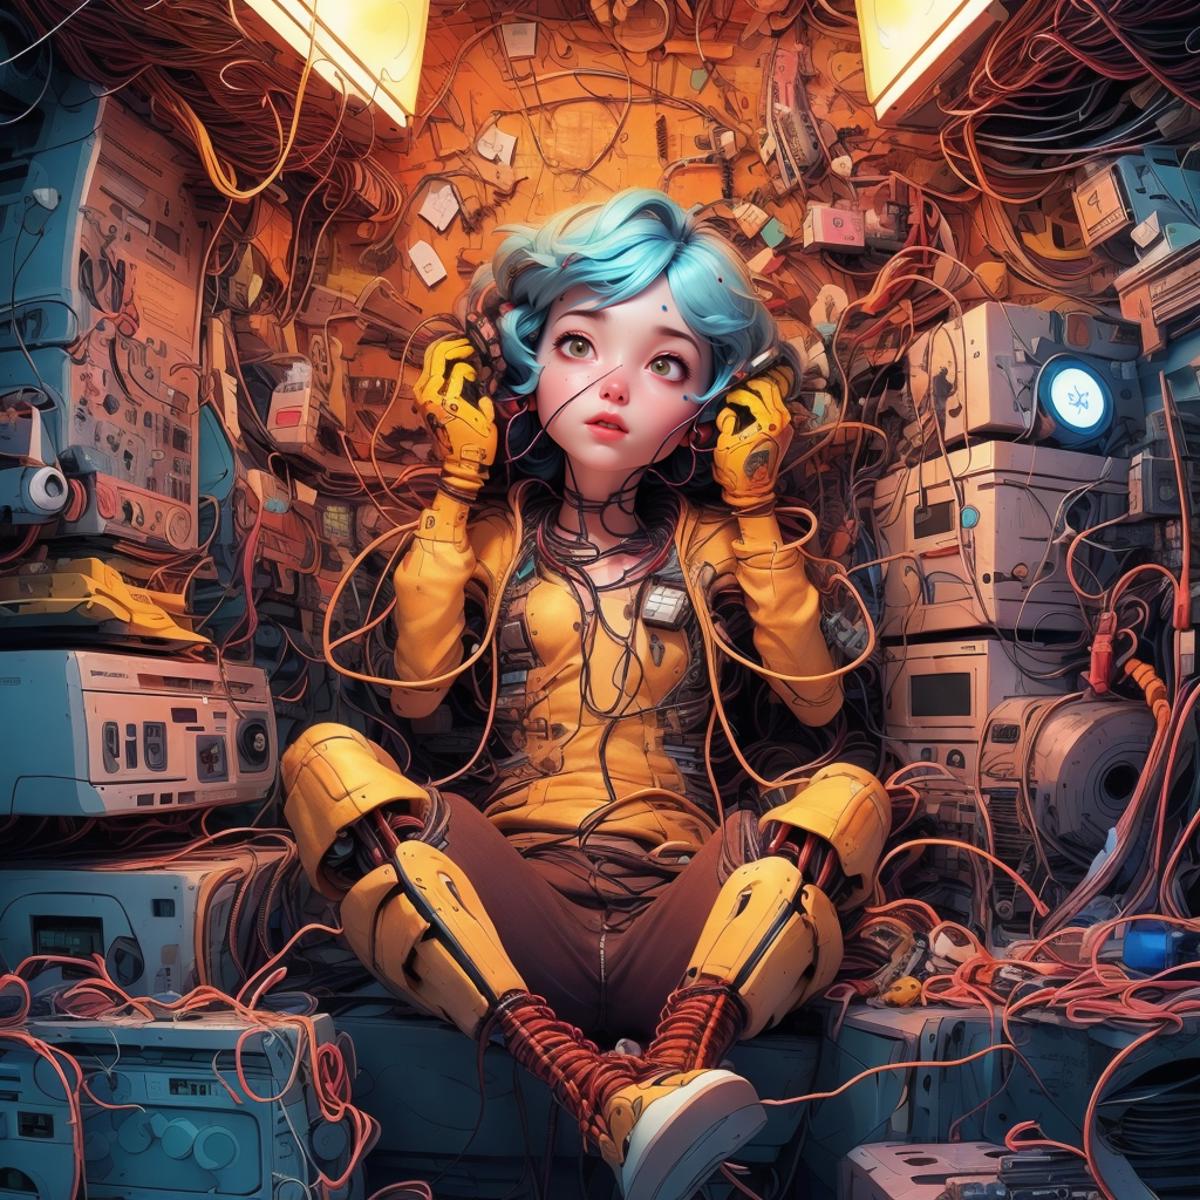 A young girl sitting in a pile of electronic equipment.